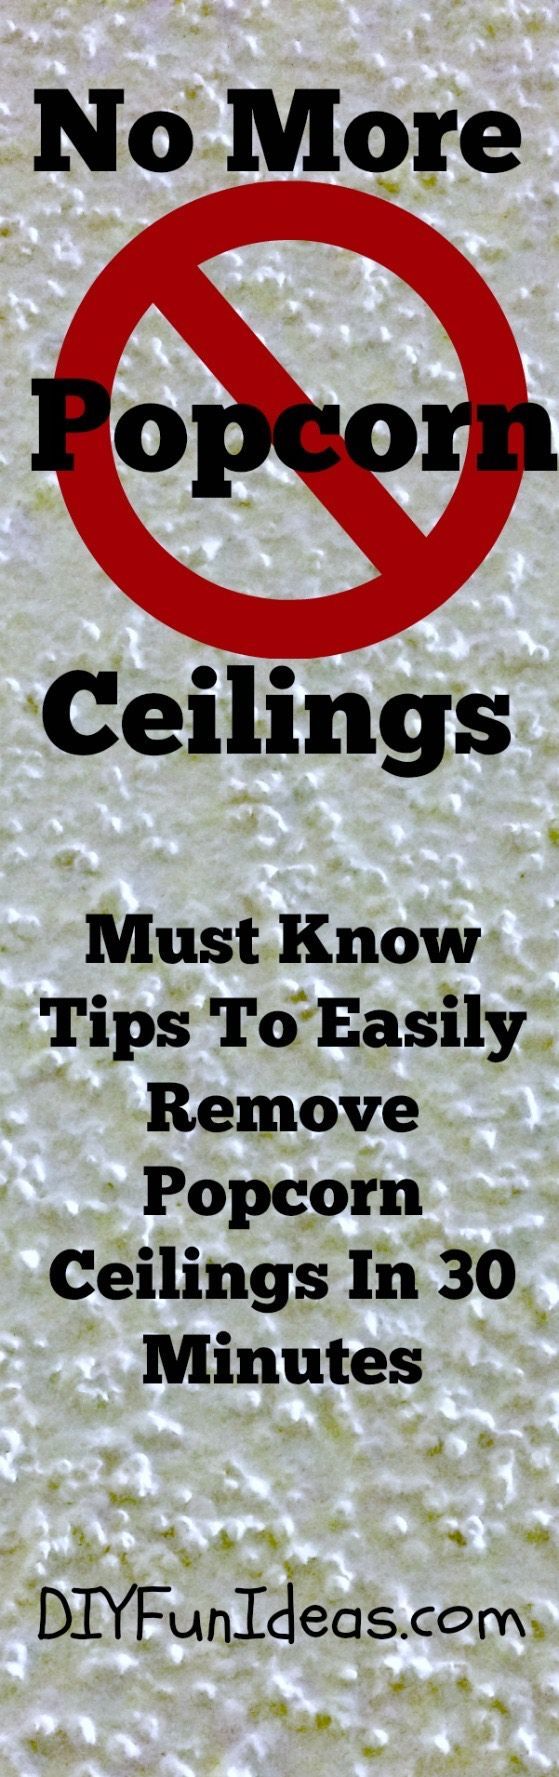 How To Easily Remove Popcorn Ceilings in 30 MInutes Plus Super Easy Clean-up Tip...